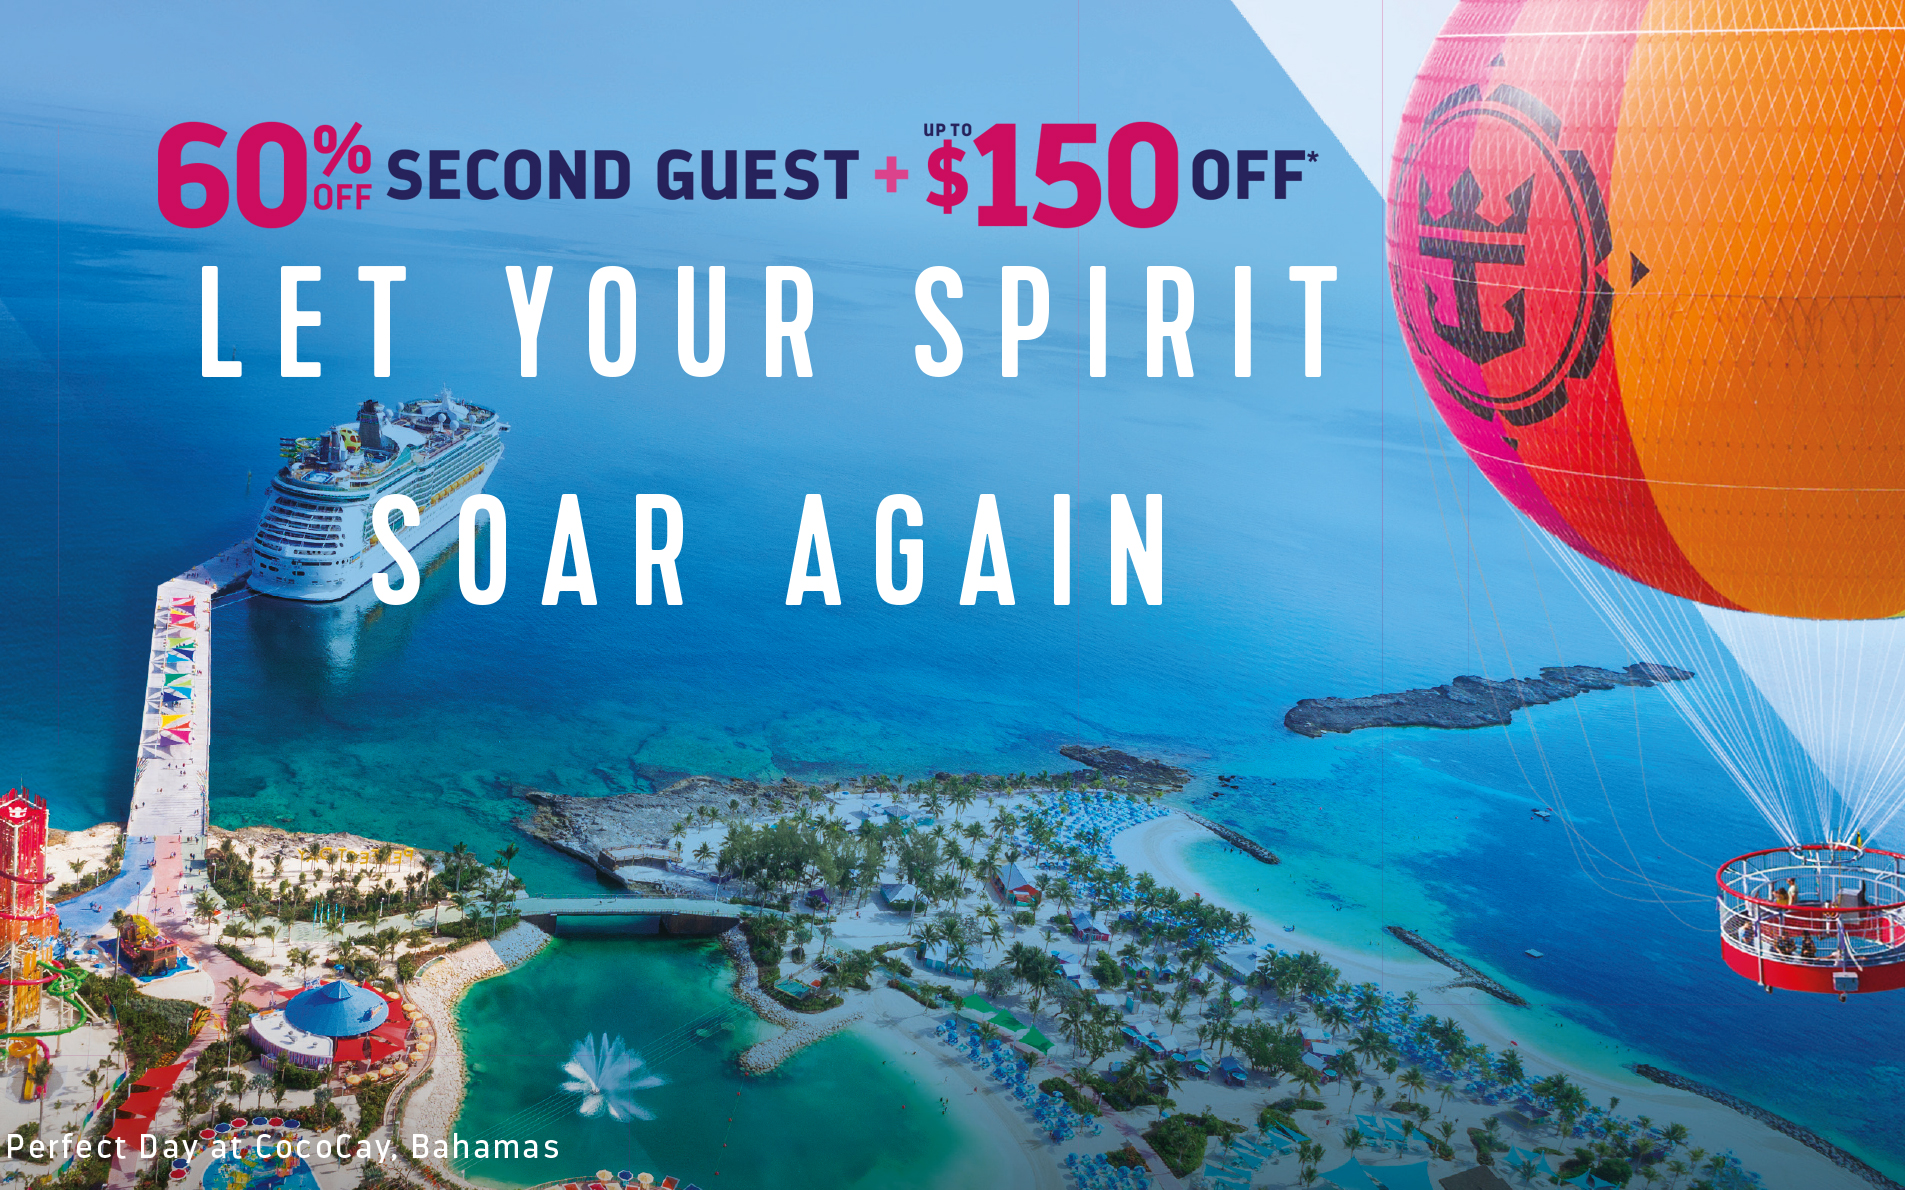 Get 60% Off Second Guest* + up to150 Off* with Royal Caribbean